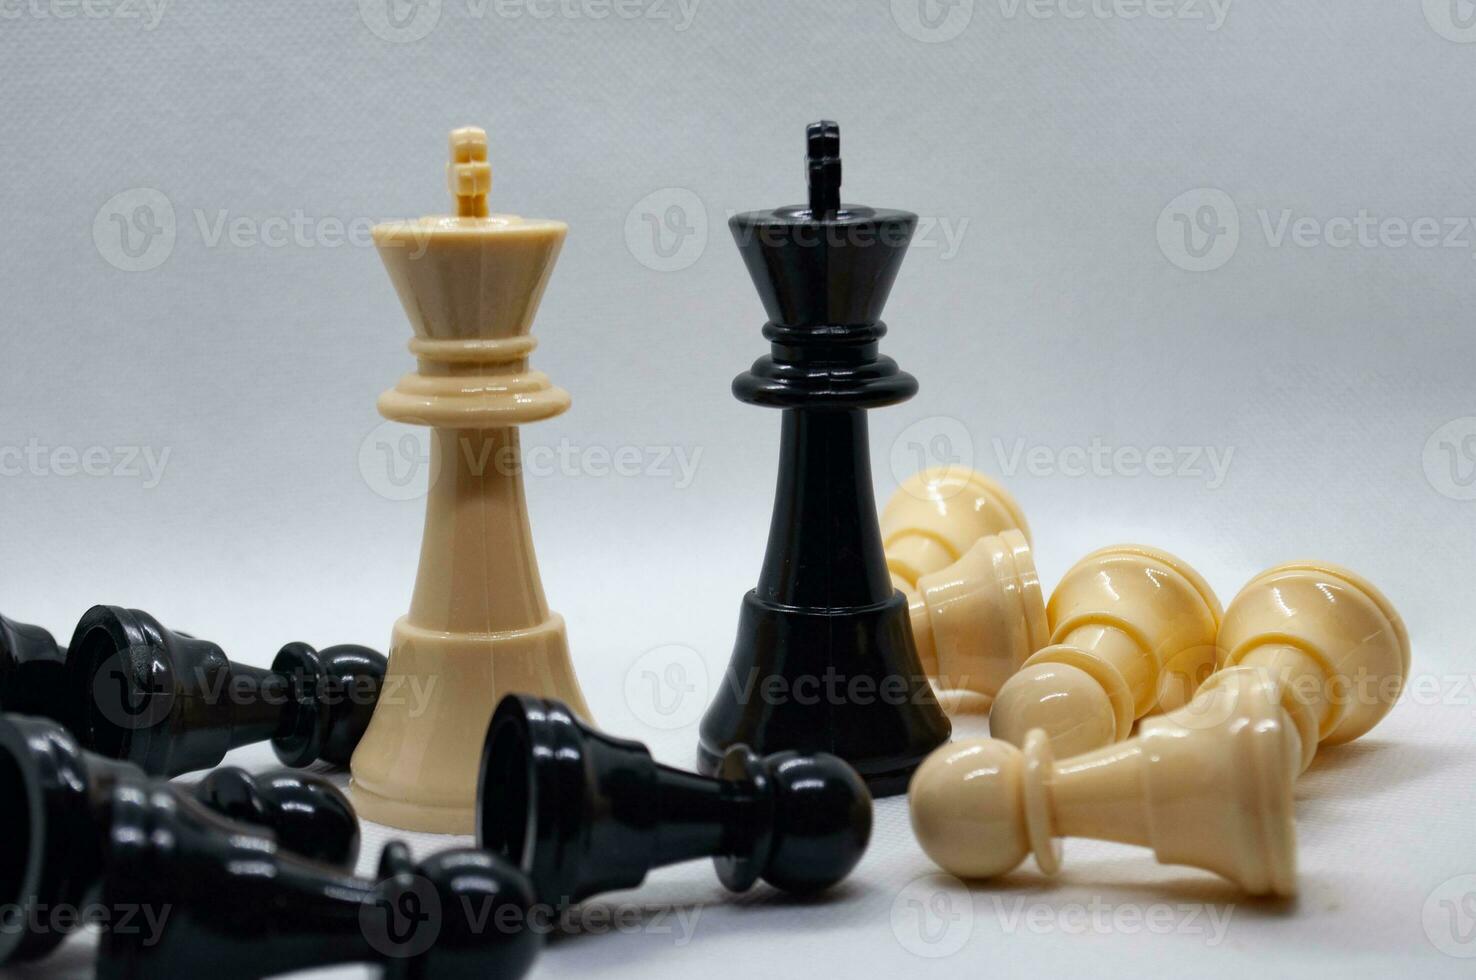 Close up of kings of chess game. Battle, strategy and tactics. photo